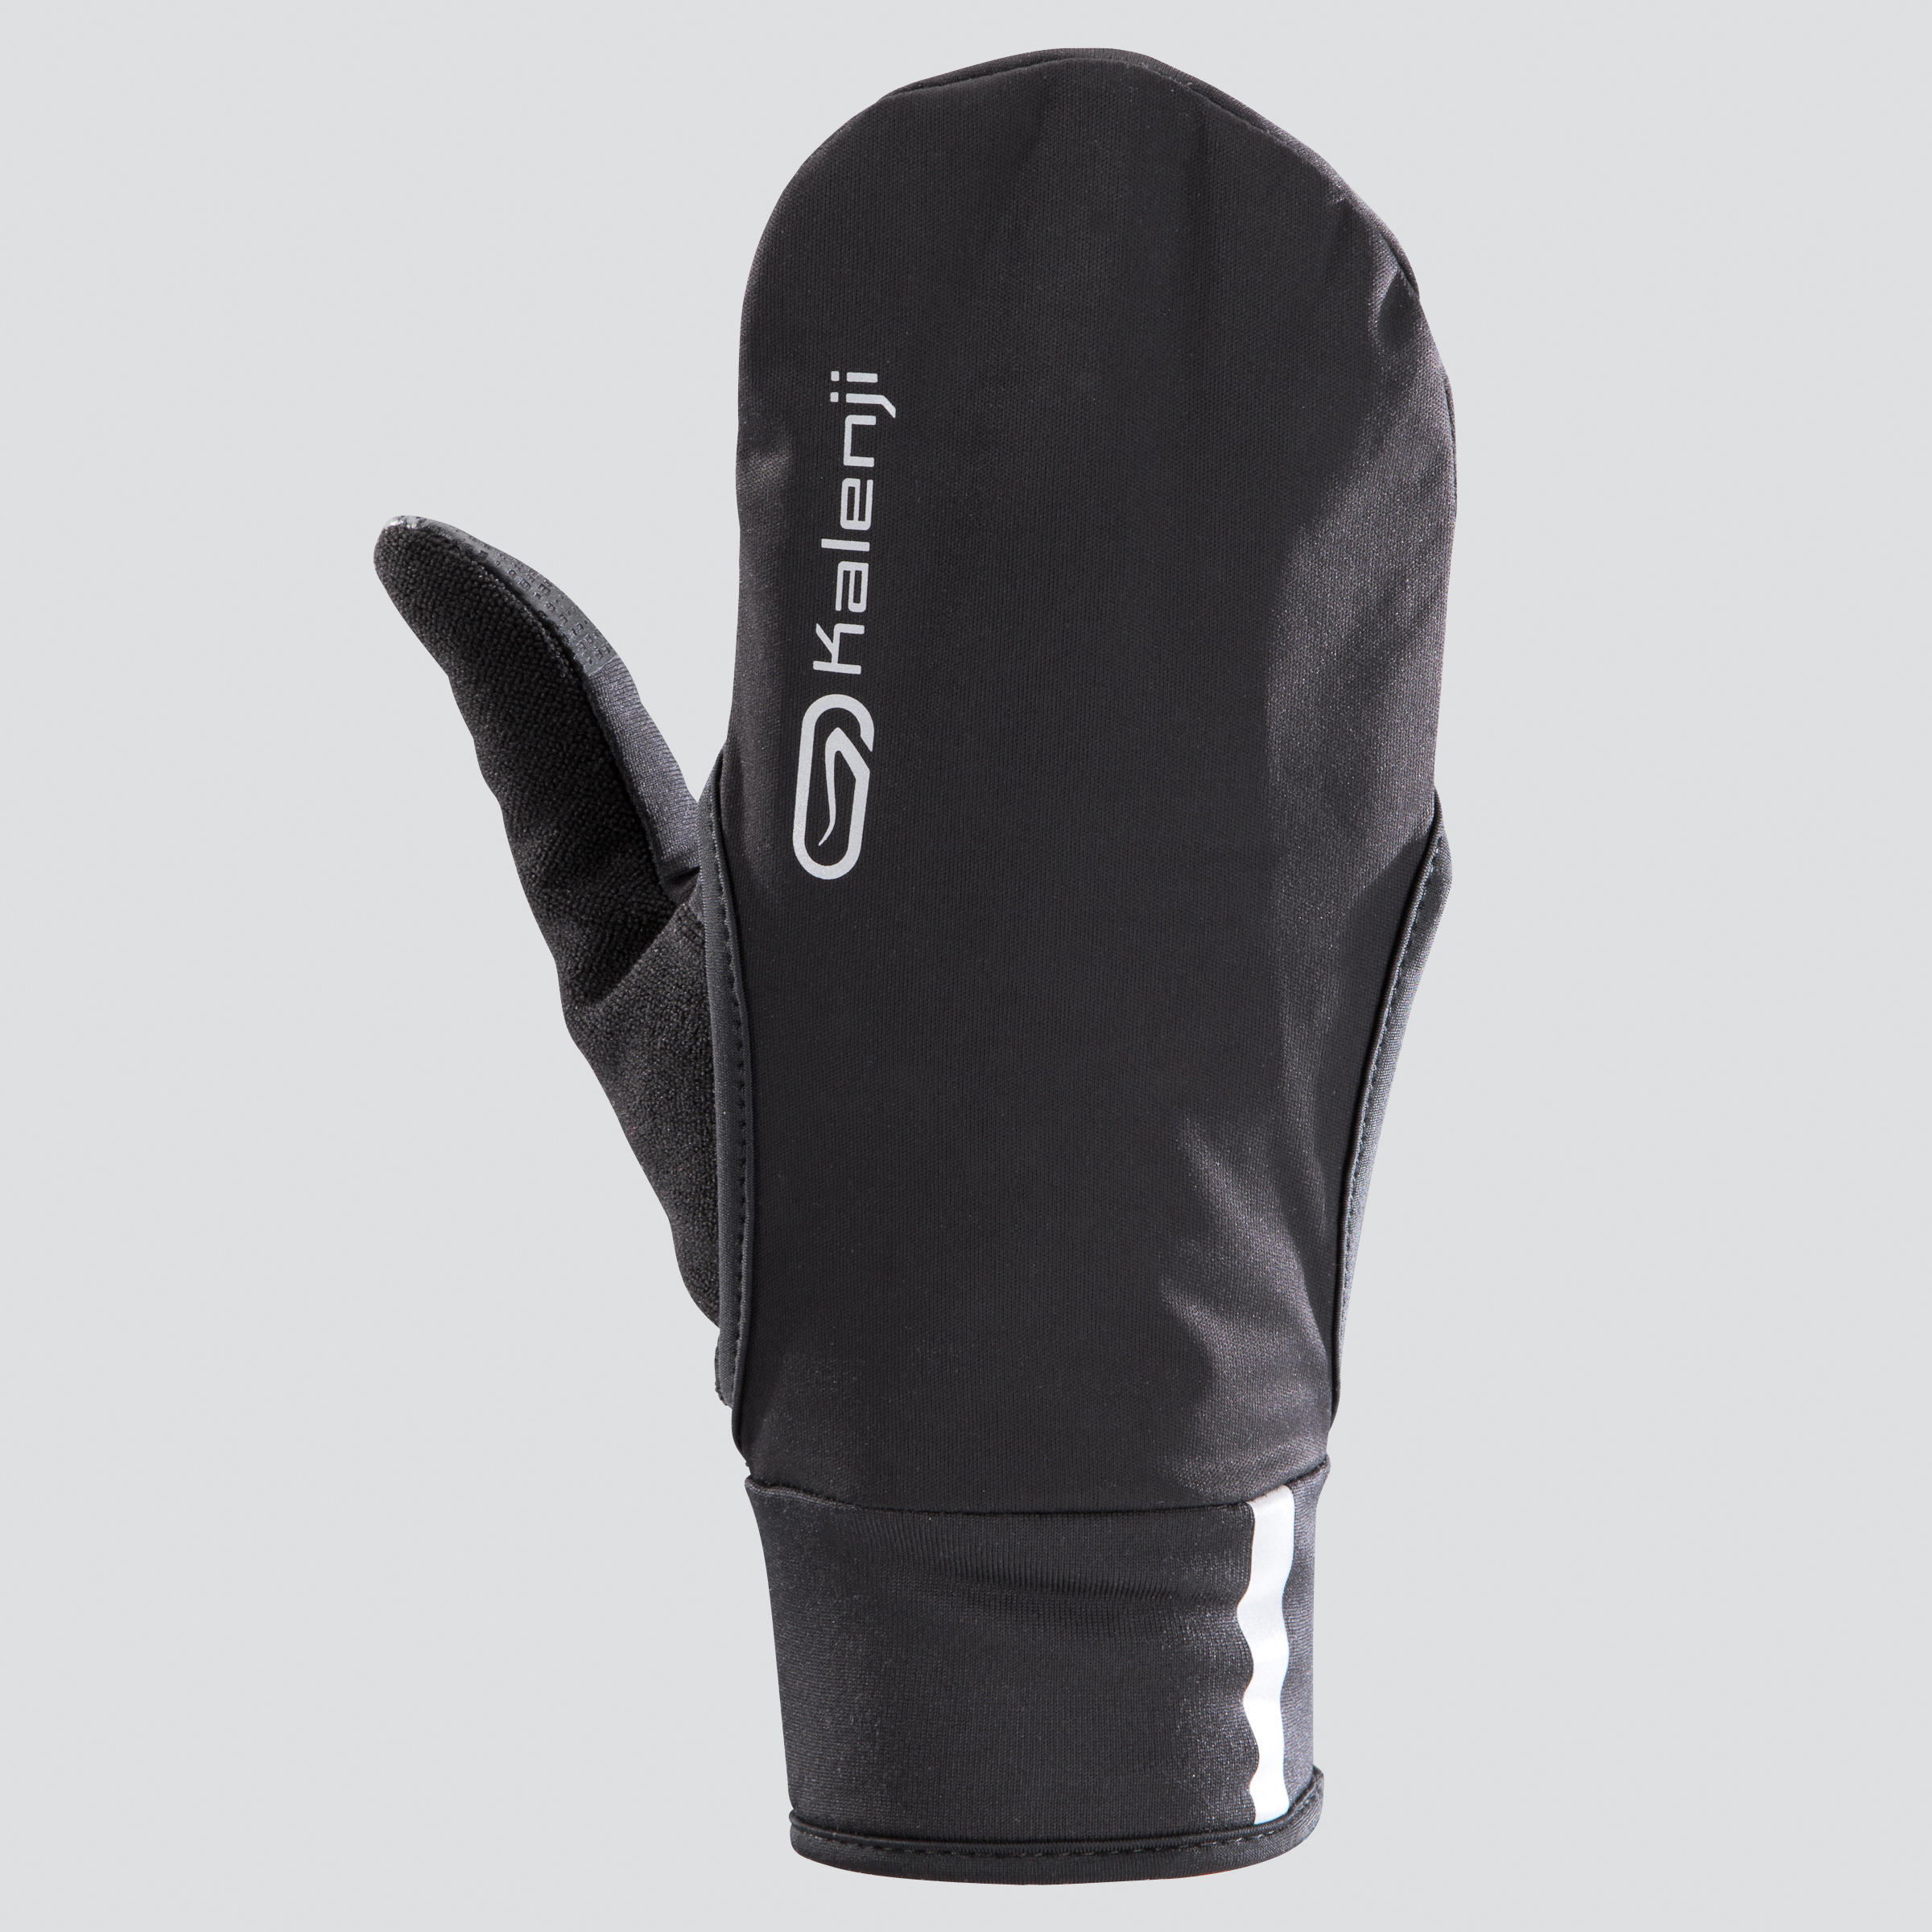 EVOLUTIV BY NIGHT GLOVES BLACK additional mittent cover 9/12